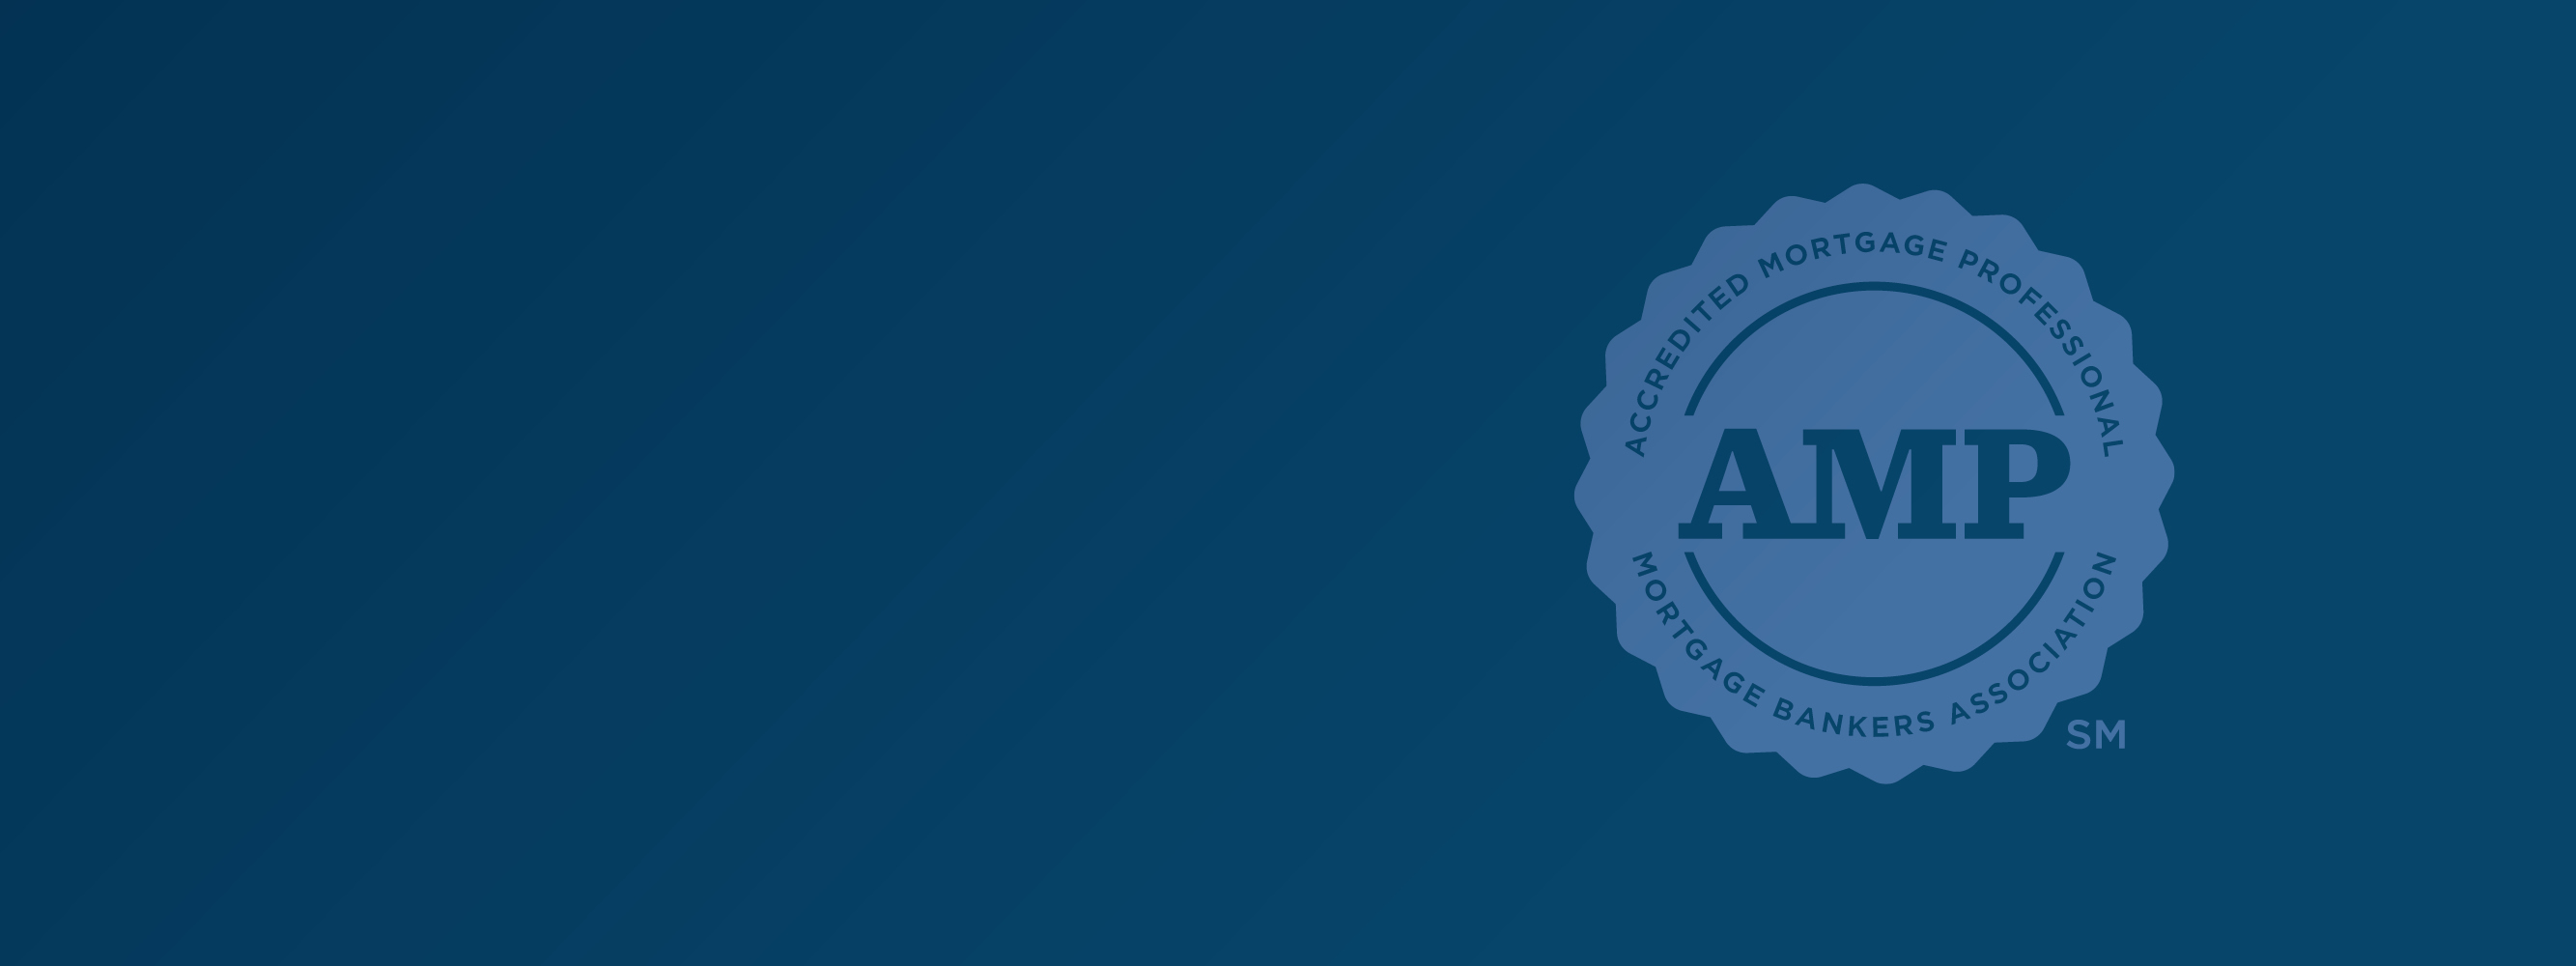 Education banner - image of AMP seal